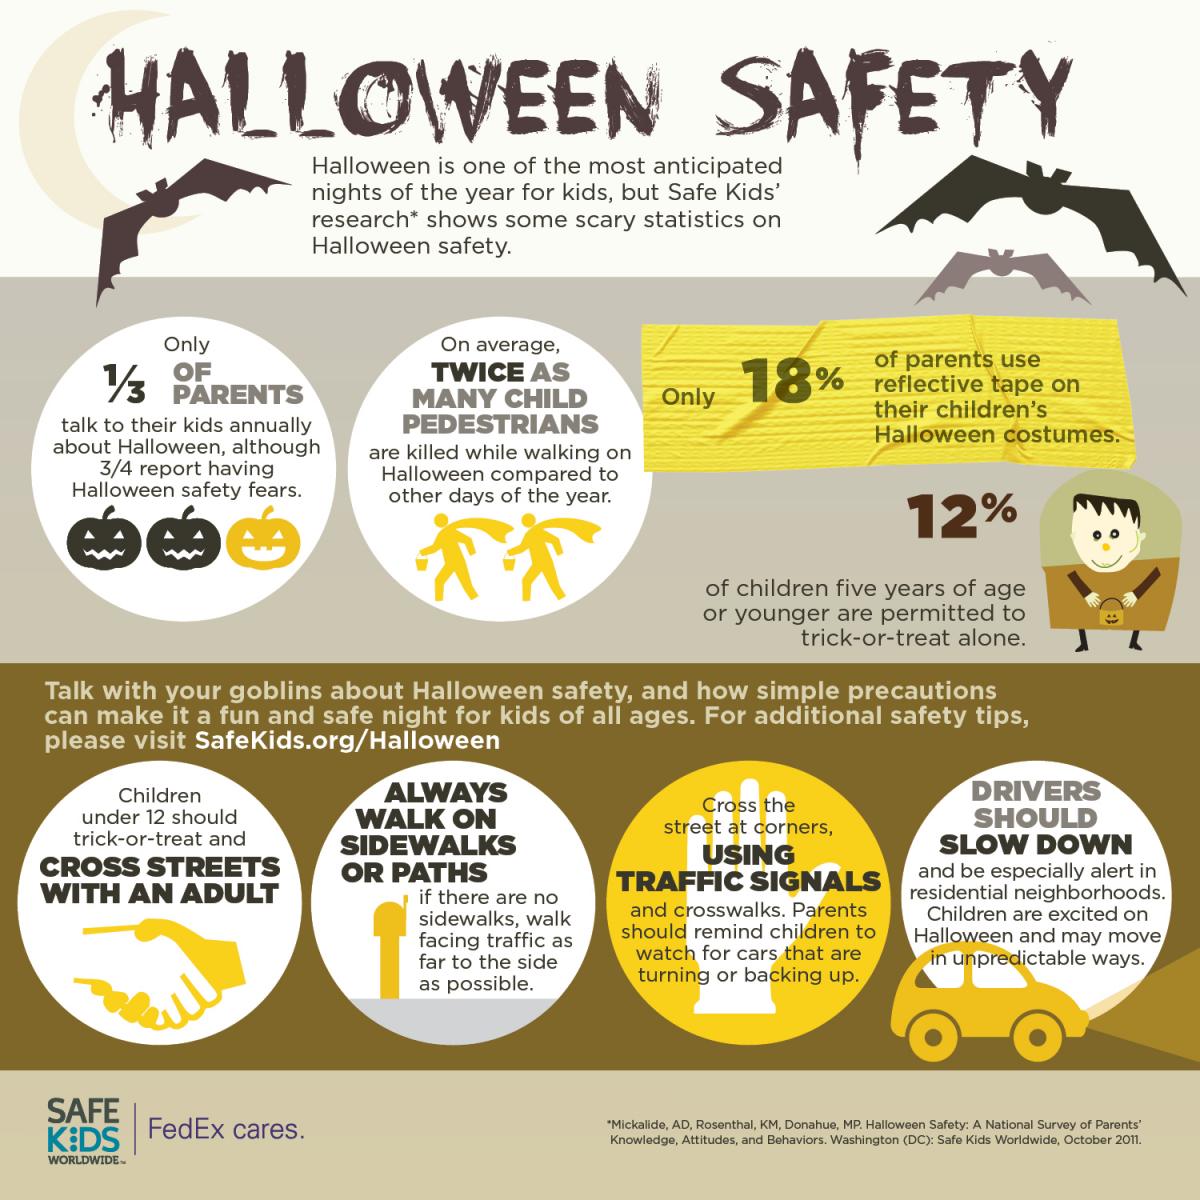 Halloween accident statistics are real. Pay attention when you're driving.